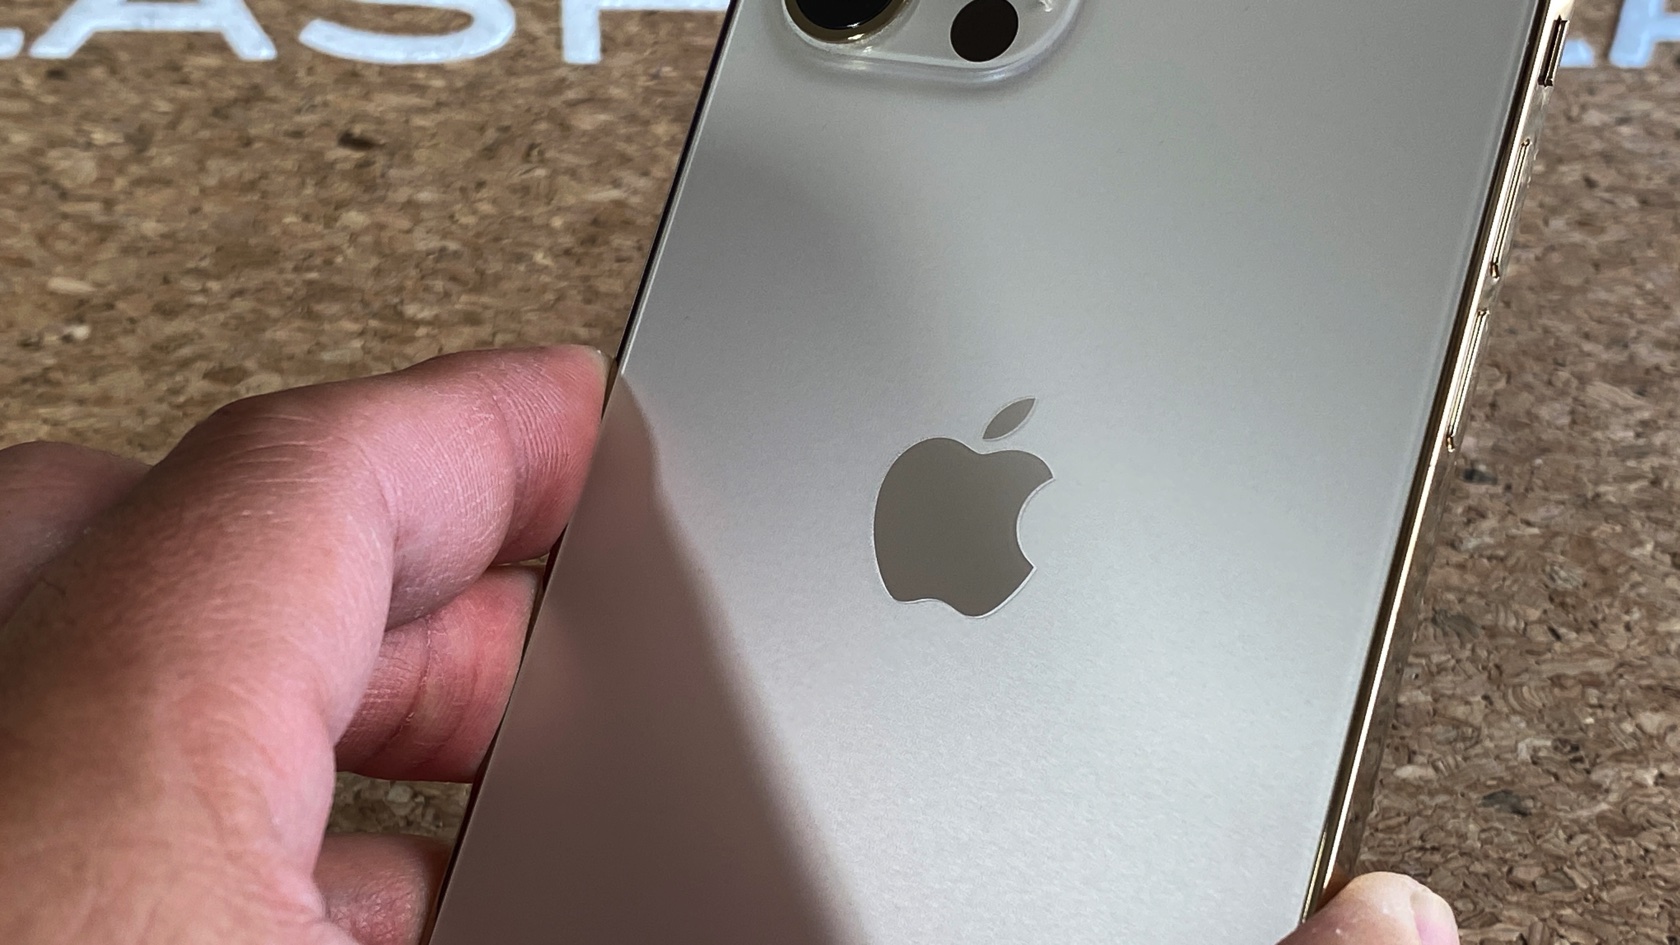 The Gold Iphone 12 Pro Is Just So Darn Pretty Hands On Slashgear